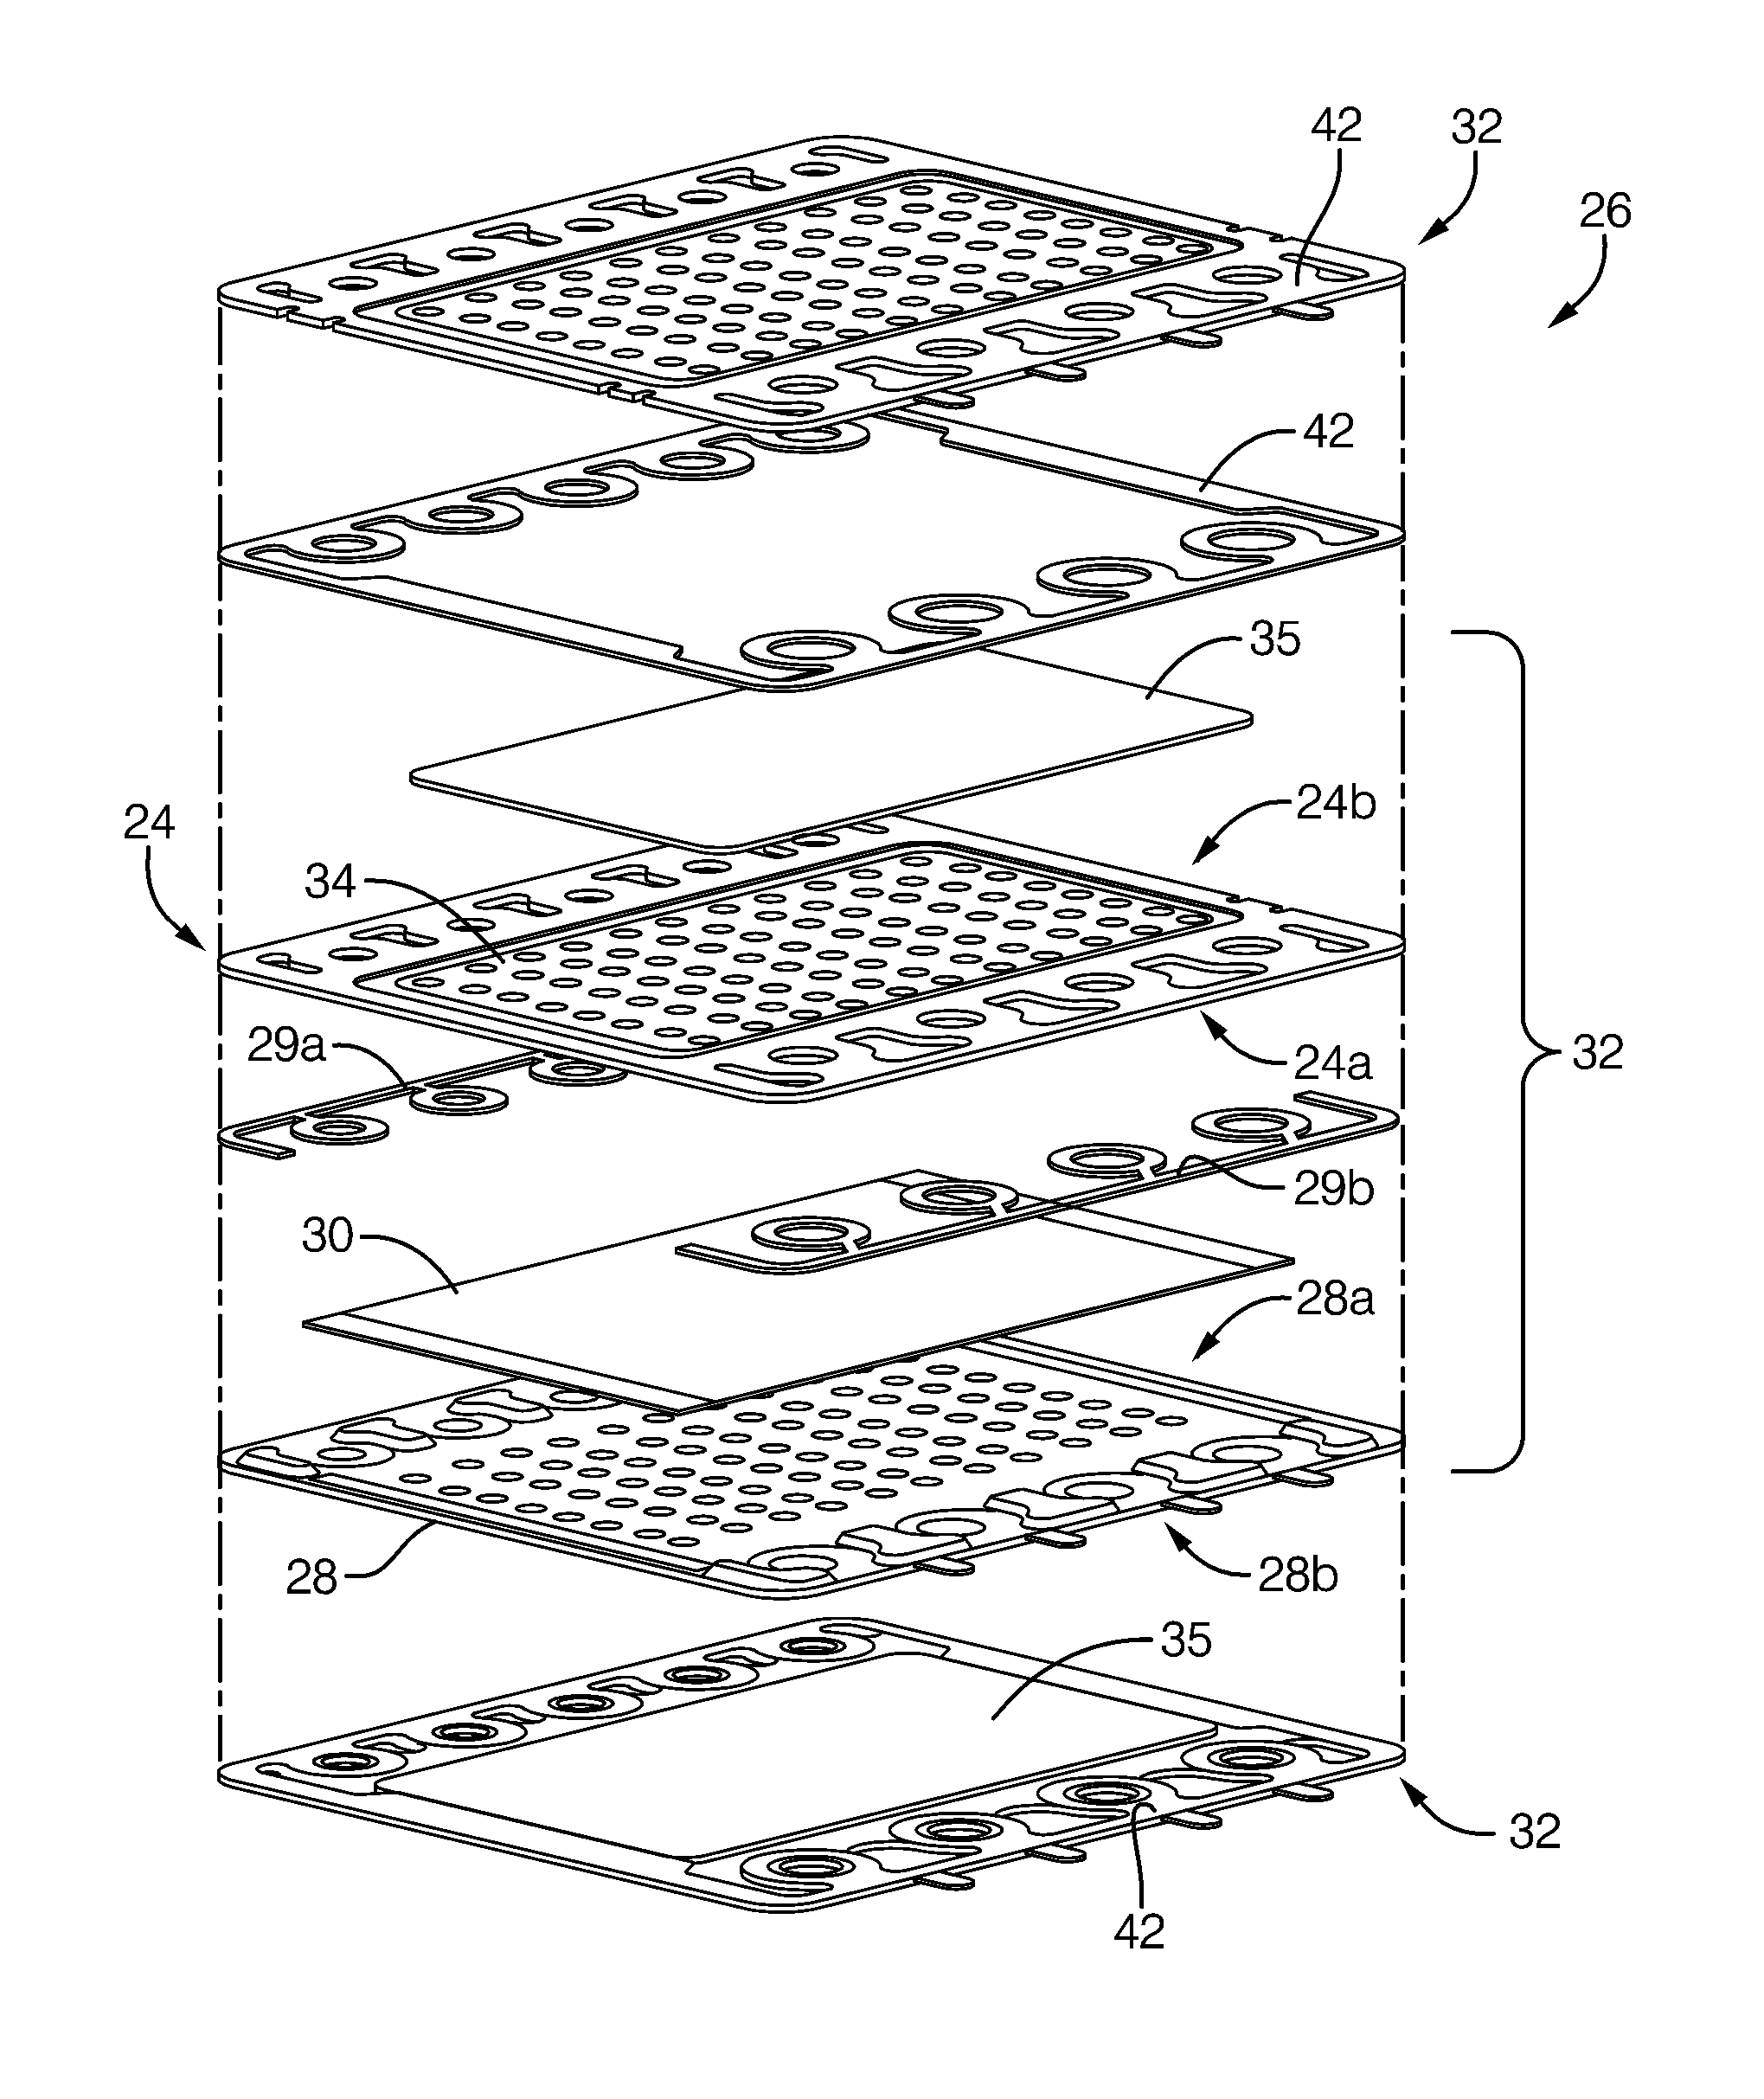 Method of making a solid oxide fuel cell stack